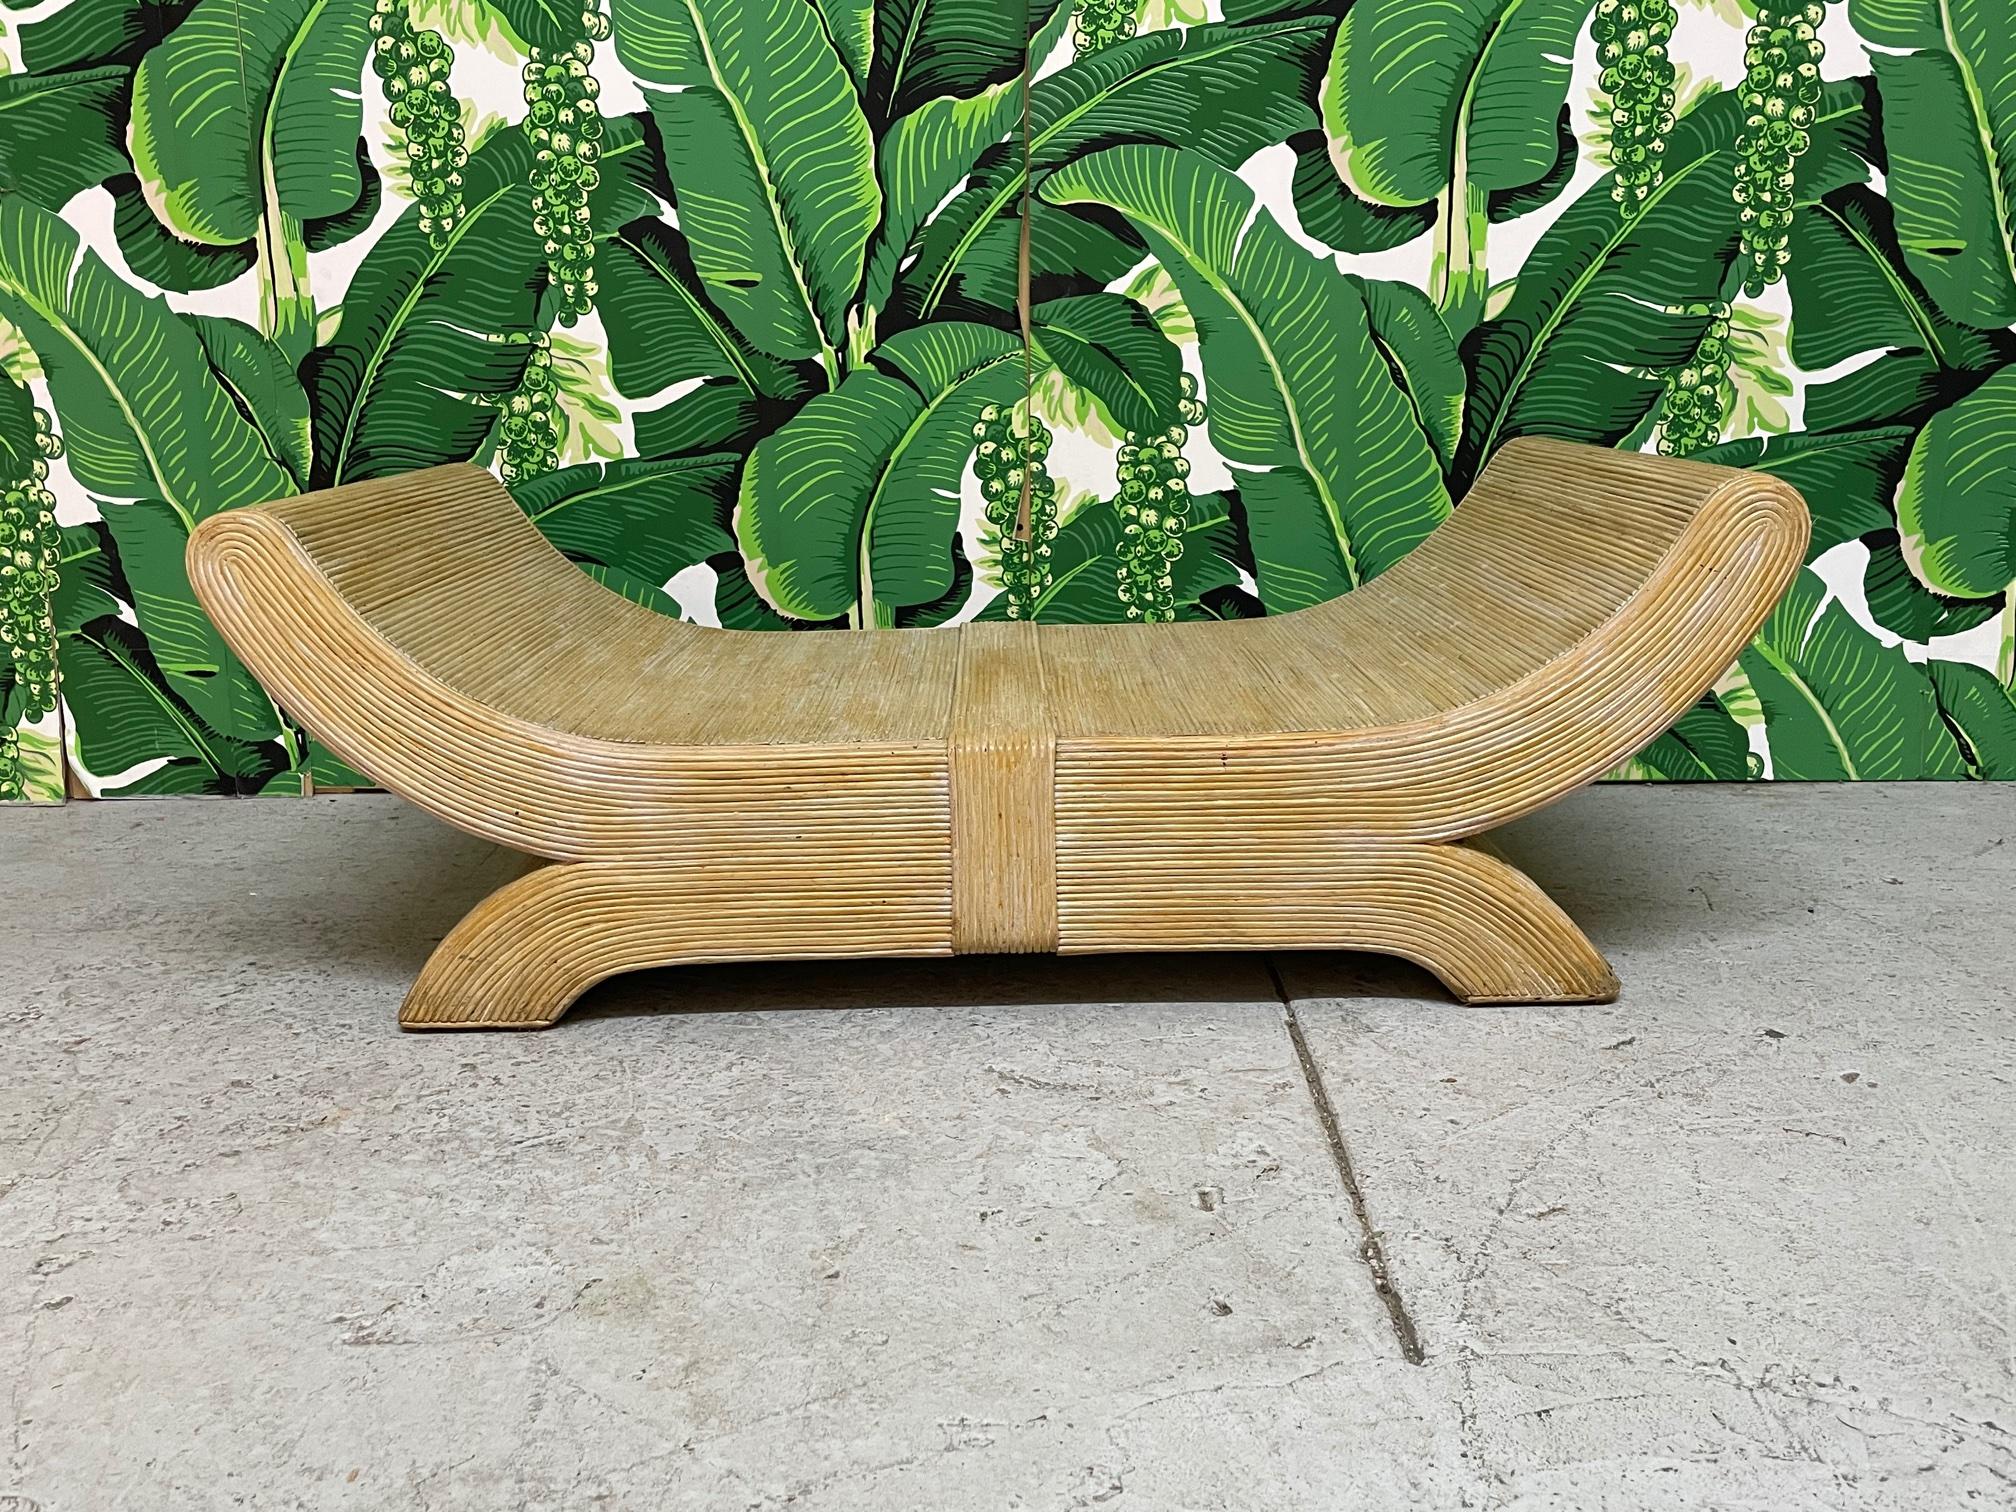 Vintage emperors seat/bench by Betty Cobonpue. Pencil reed rattan veneer over wood structure. Part of Cobonpue's Scultura series. Very good condition with only very minor imperfections consistent with age.